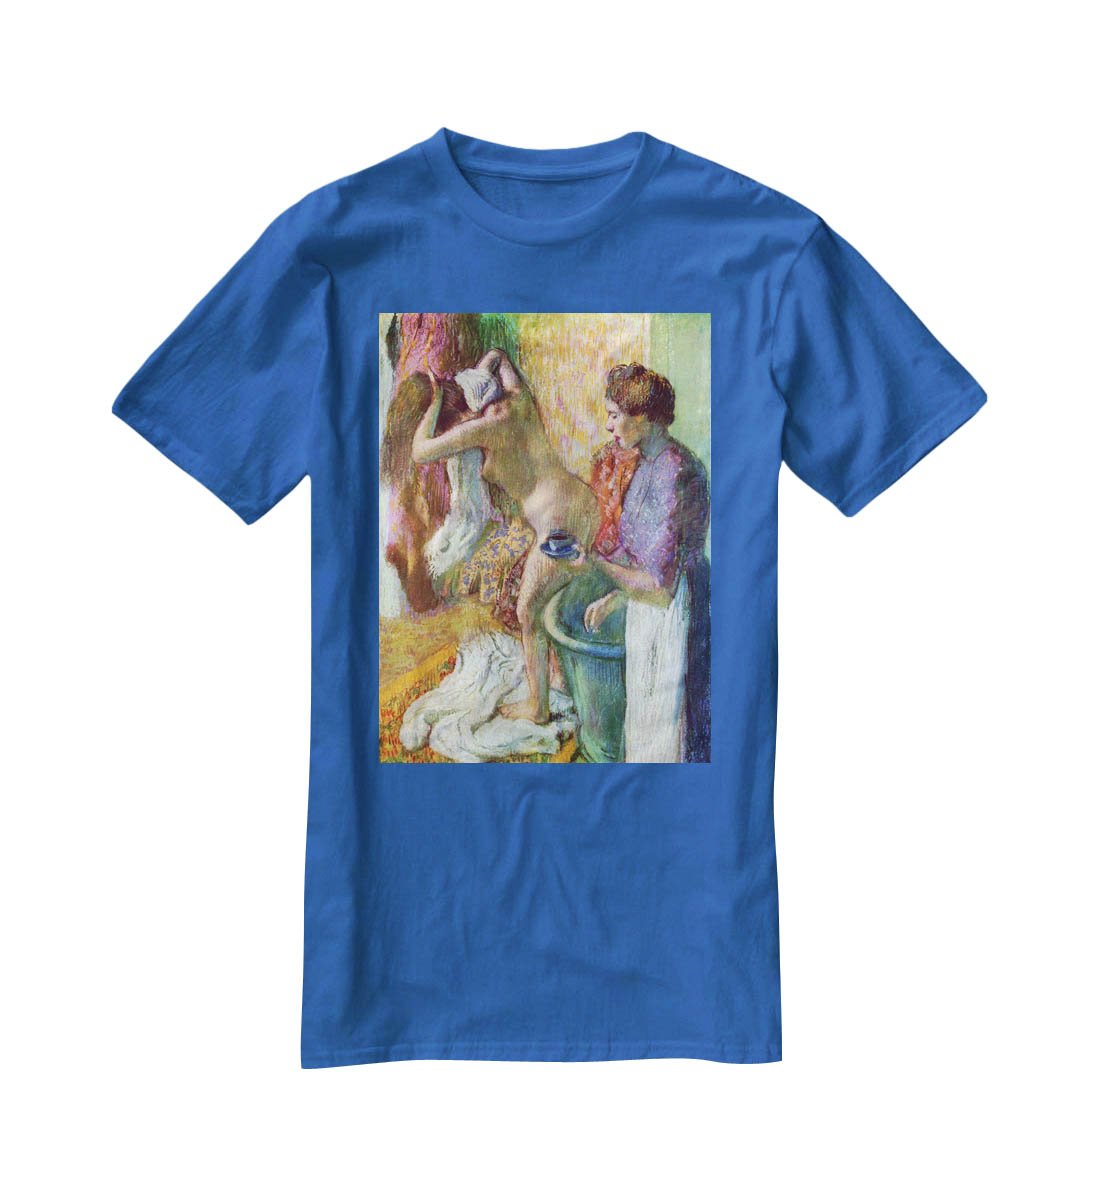 After bathing 1 by Degas T-Shirt - Canvas Art Rocks - 2